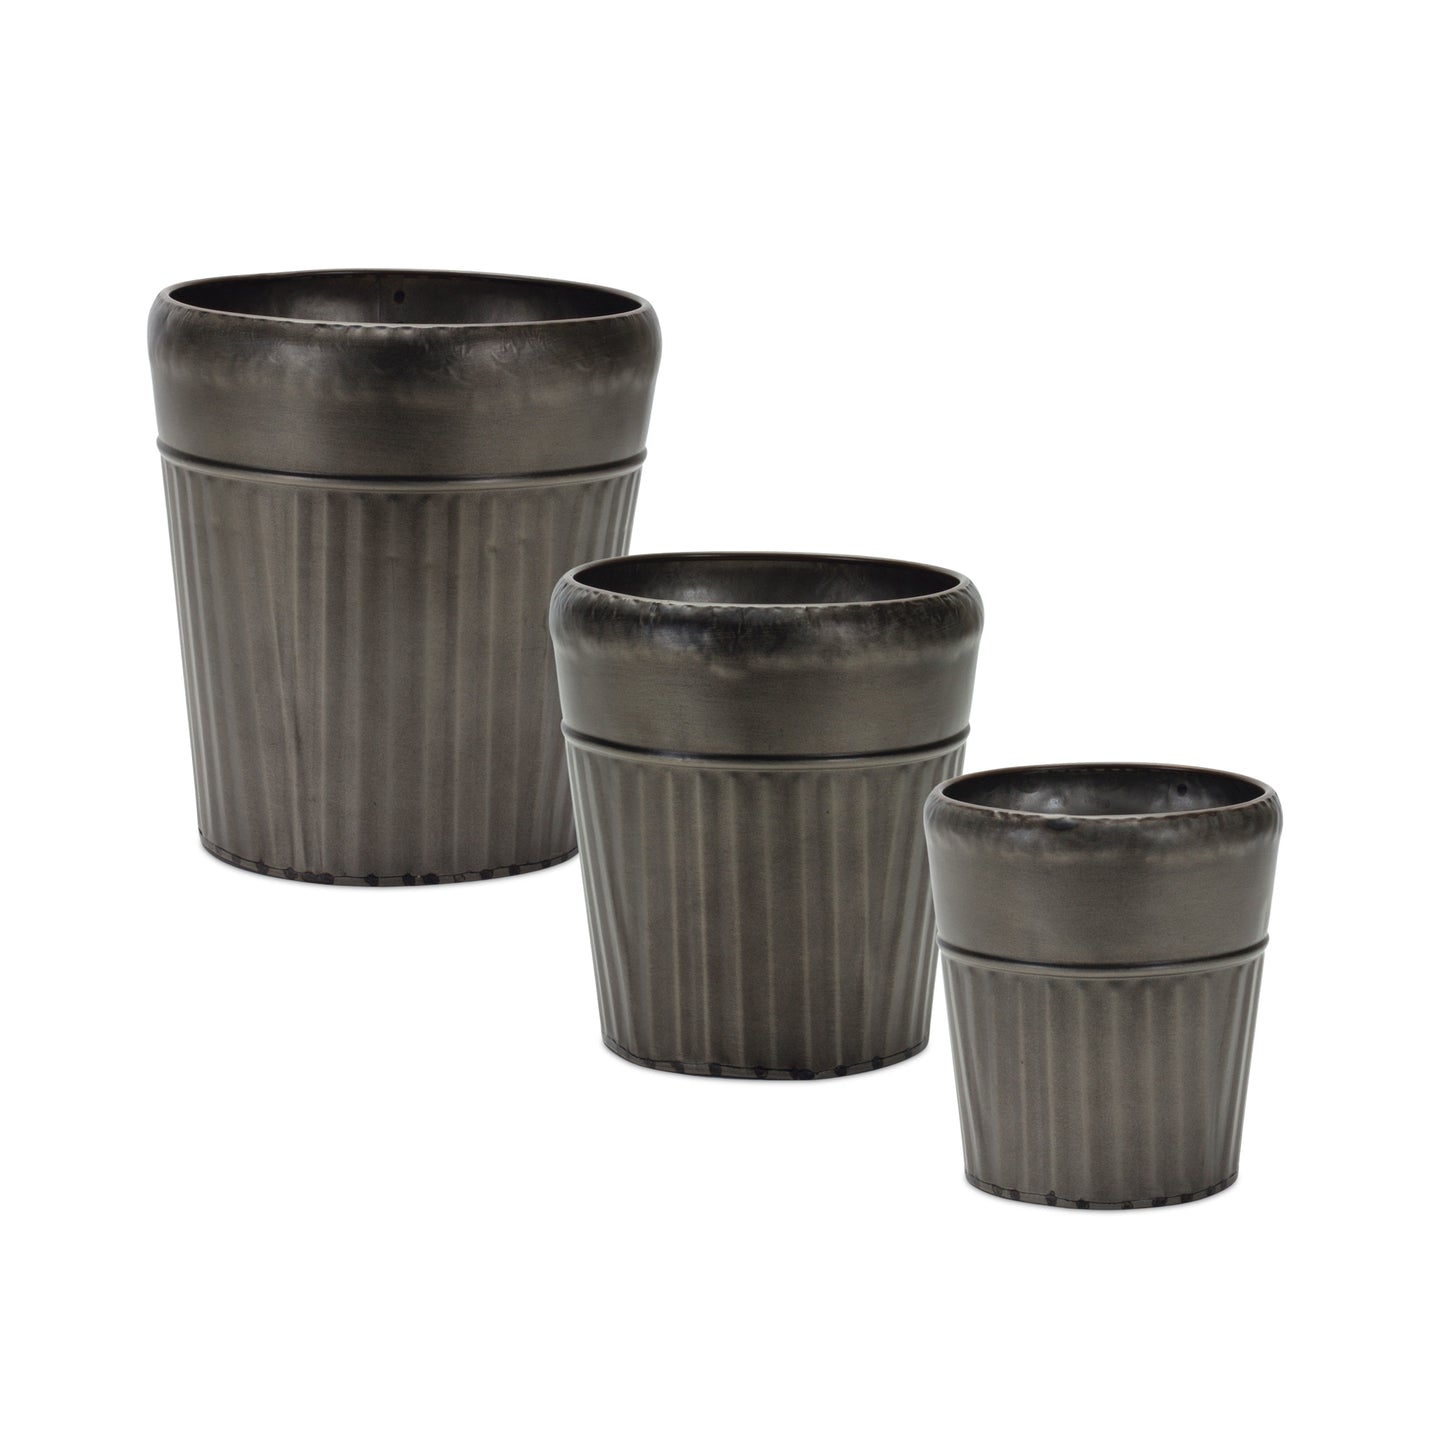 Pewter Metal Planter with Tapered Design (Set of 3)